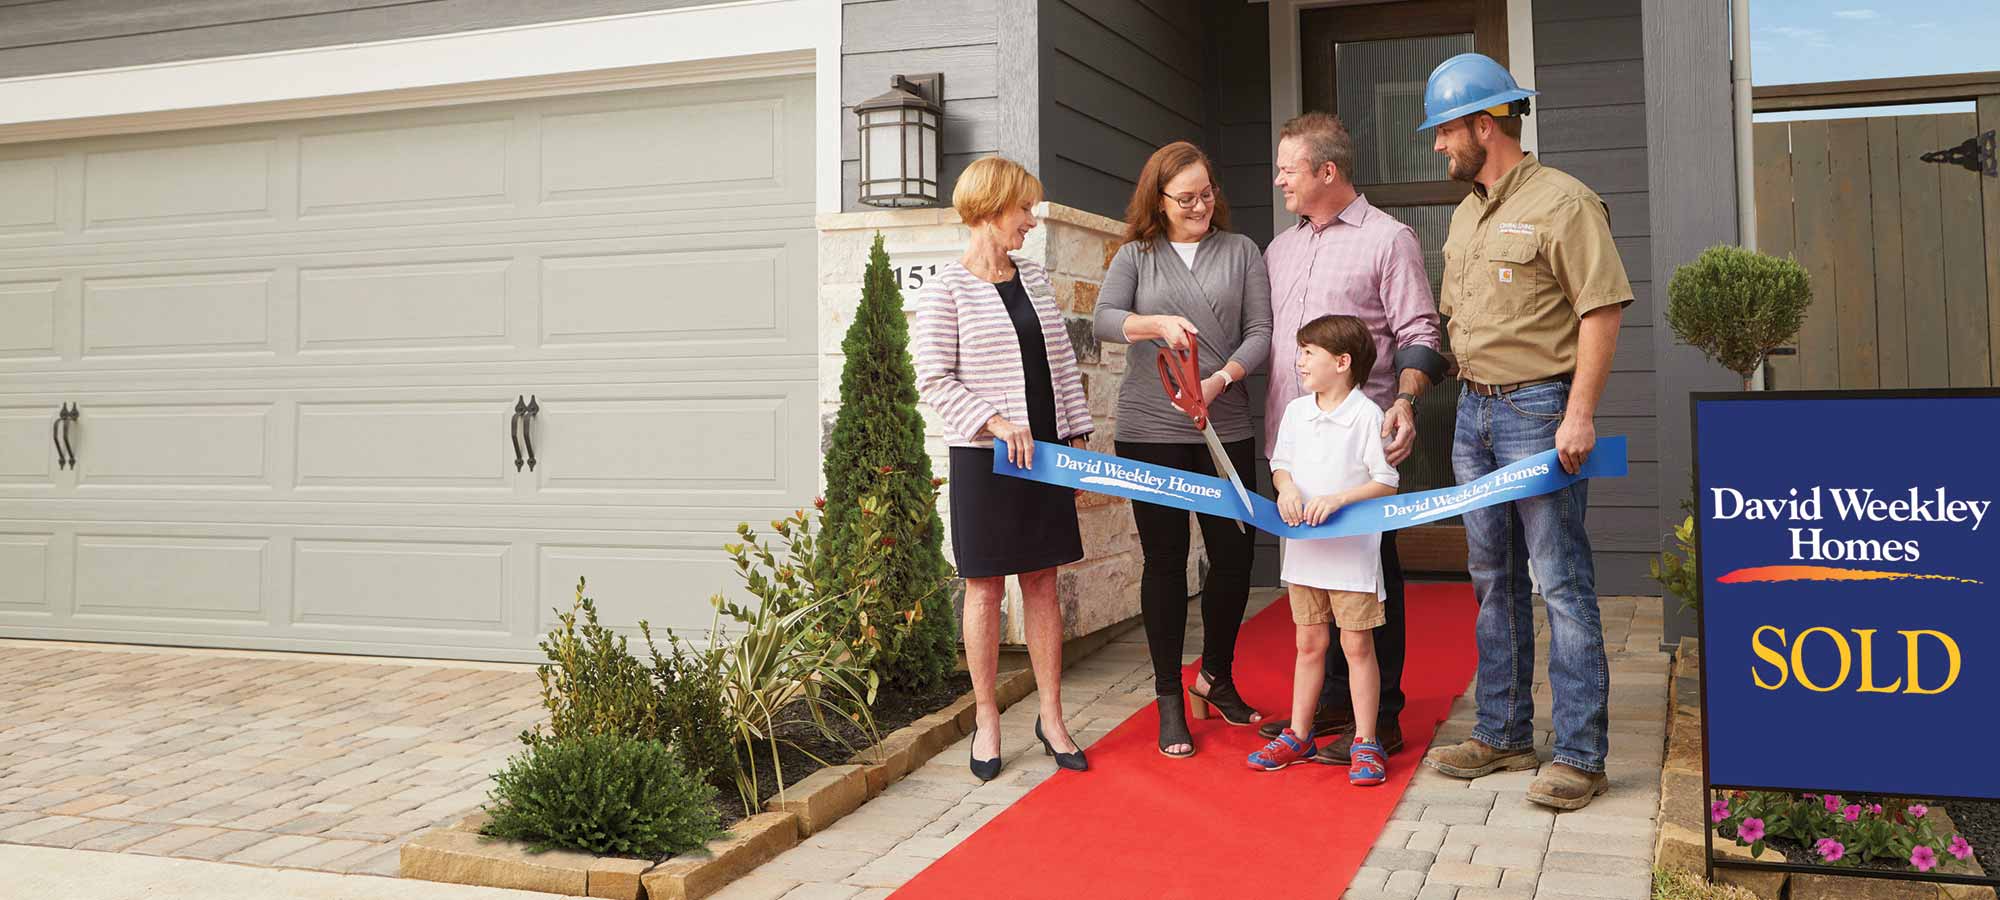 A David Weekley Sales Consultant and Personal Builder welcome a family to their new home